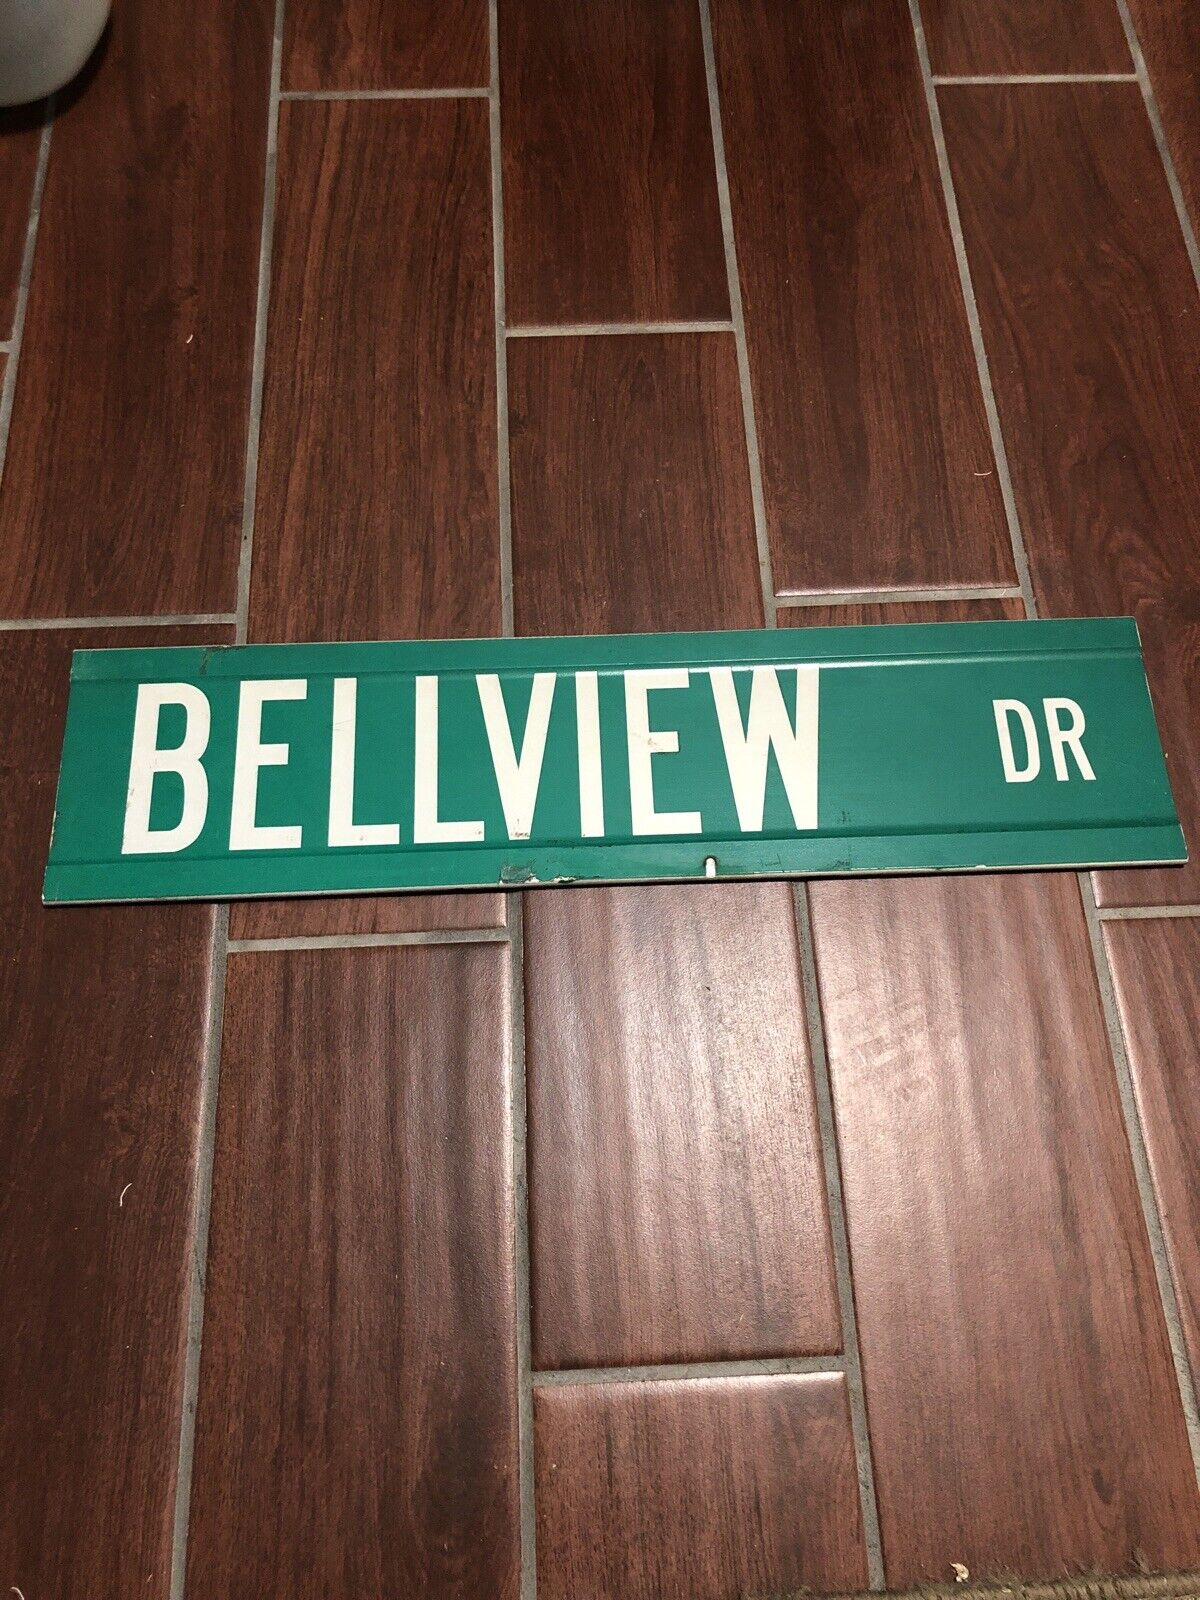 Bellview DR Retired street signs From Pell City Alabama Old Style Signs Vintage